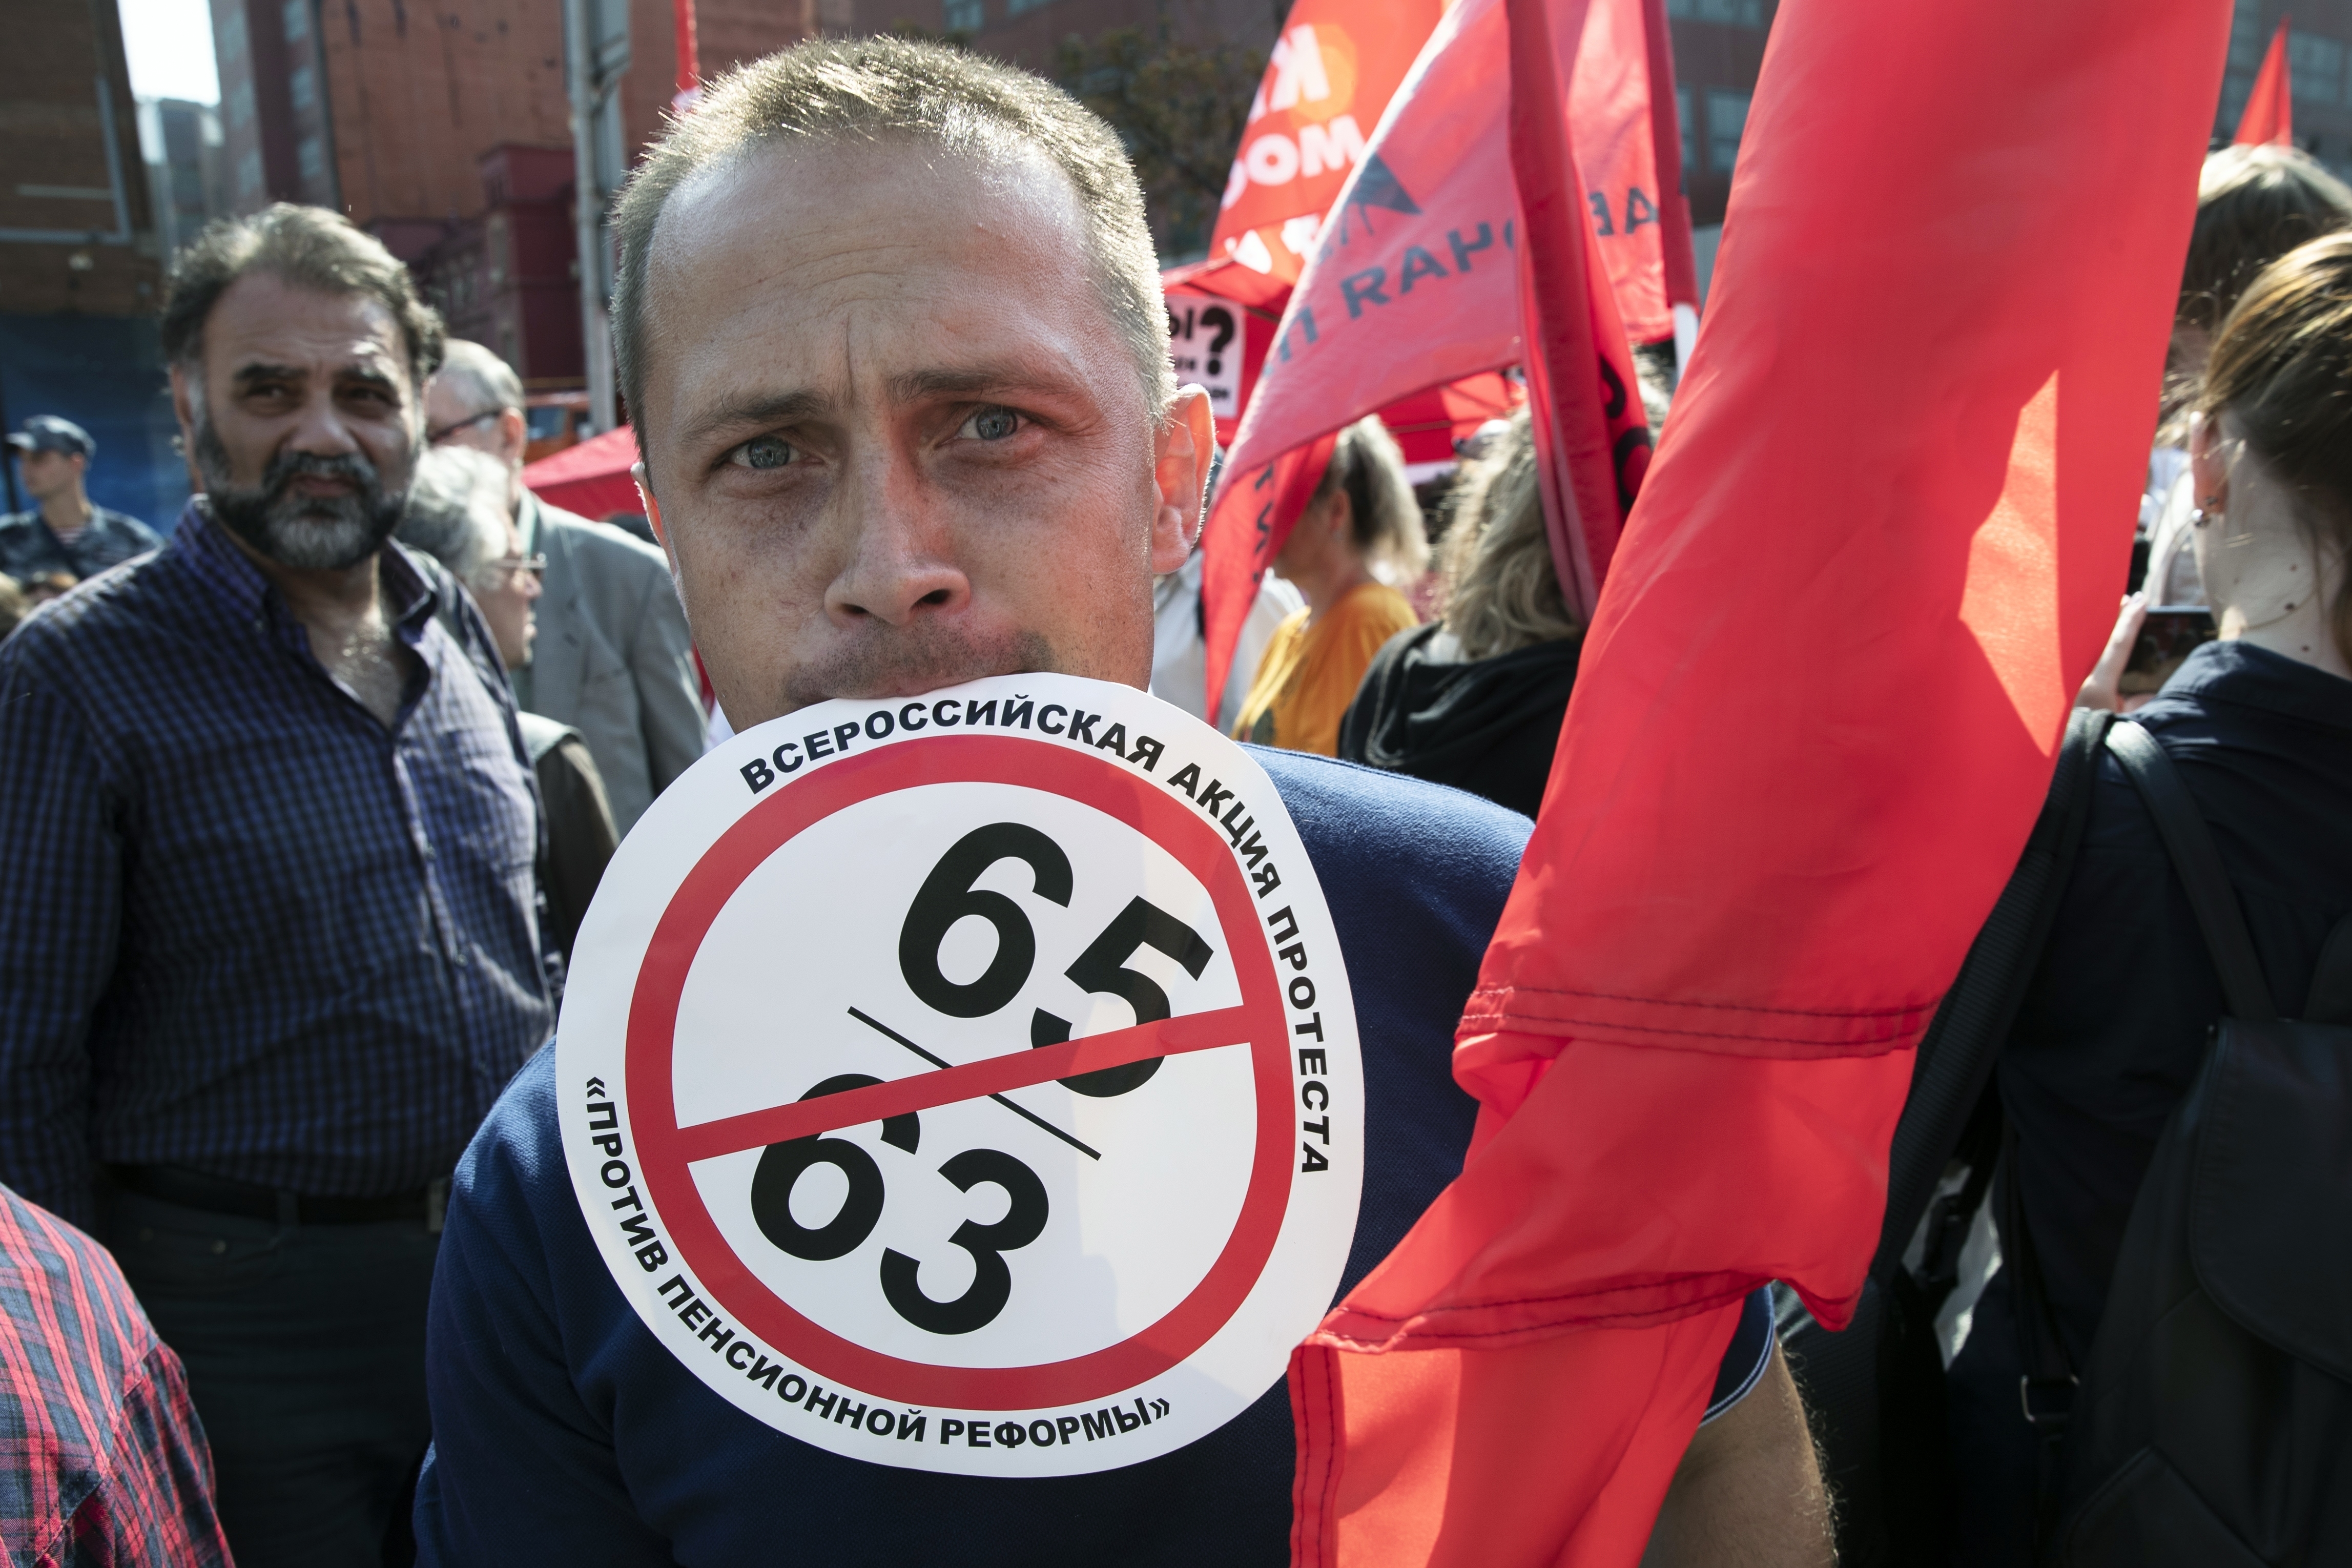 A man holds in his mouth a banner reading "An all-Russian protest against pension reform" during the Communist Party rally in Moscow